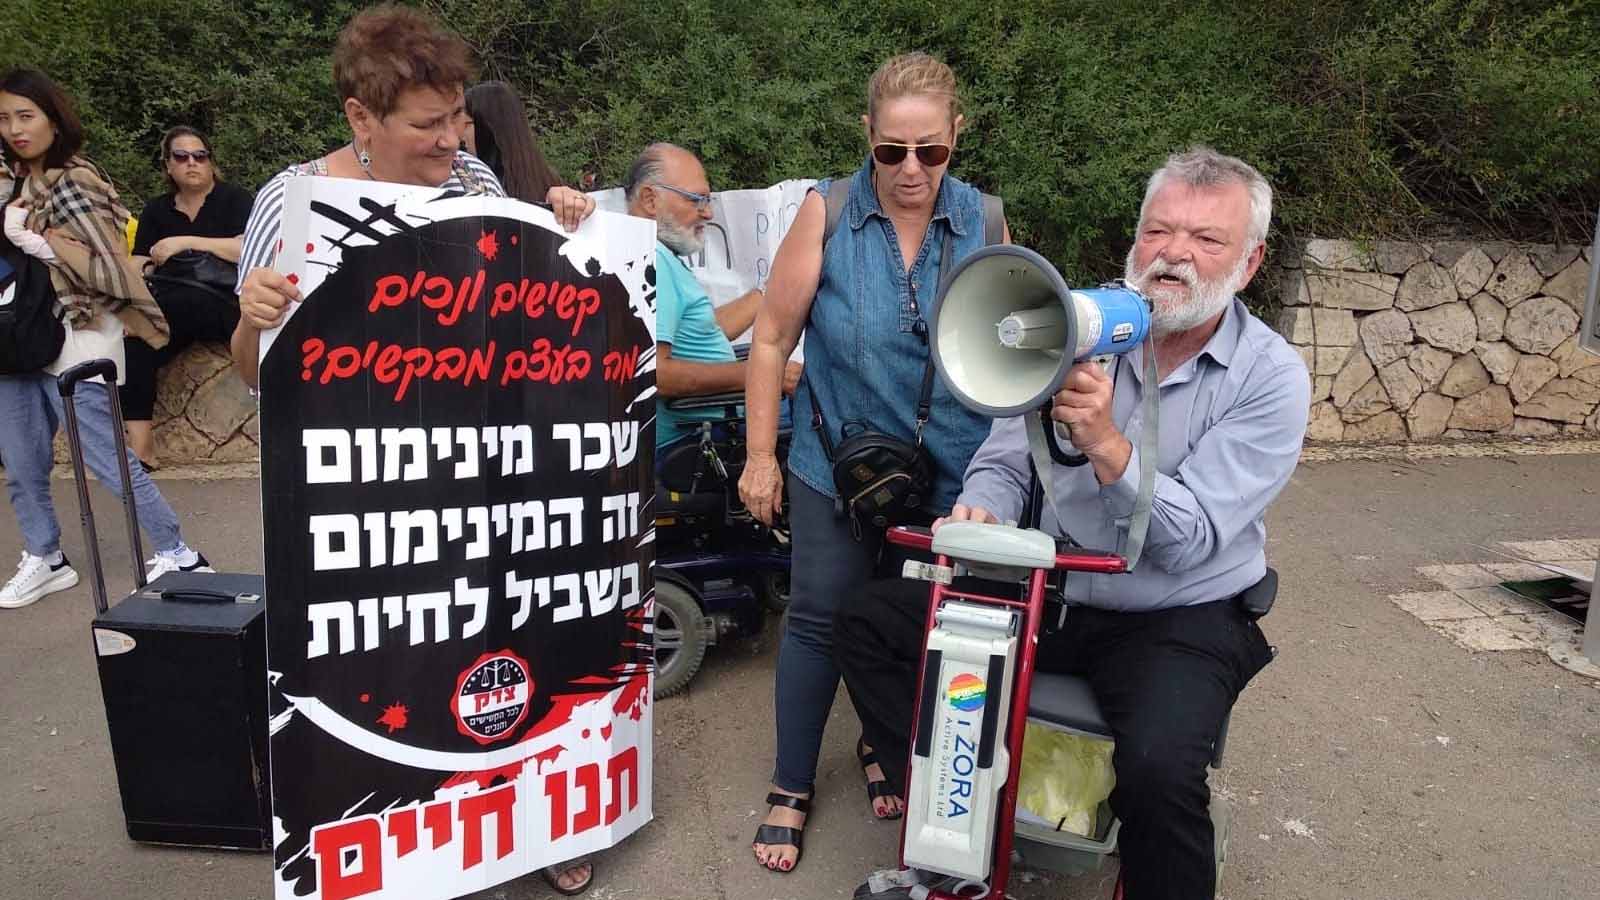 MK Ilan Gilon at a disabled activists protest in front of the Knesset. July 16 2018. Archive. Credit: Niztan Zvi Cohen